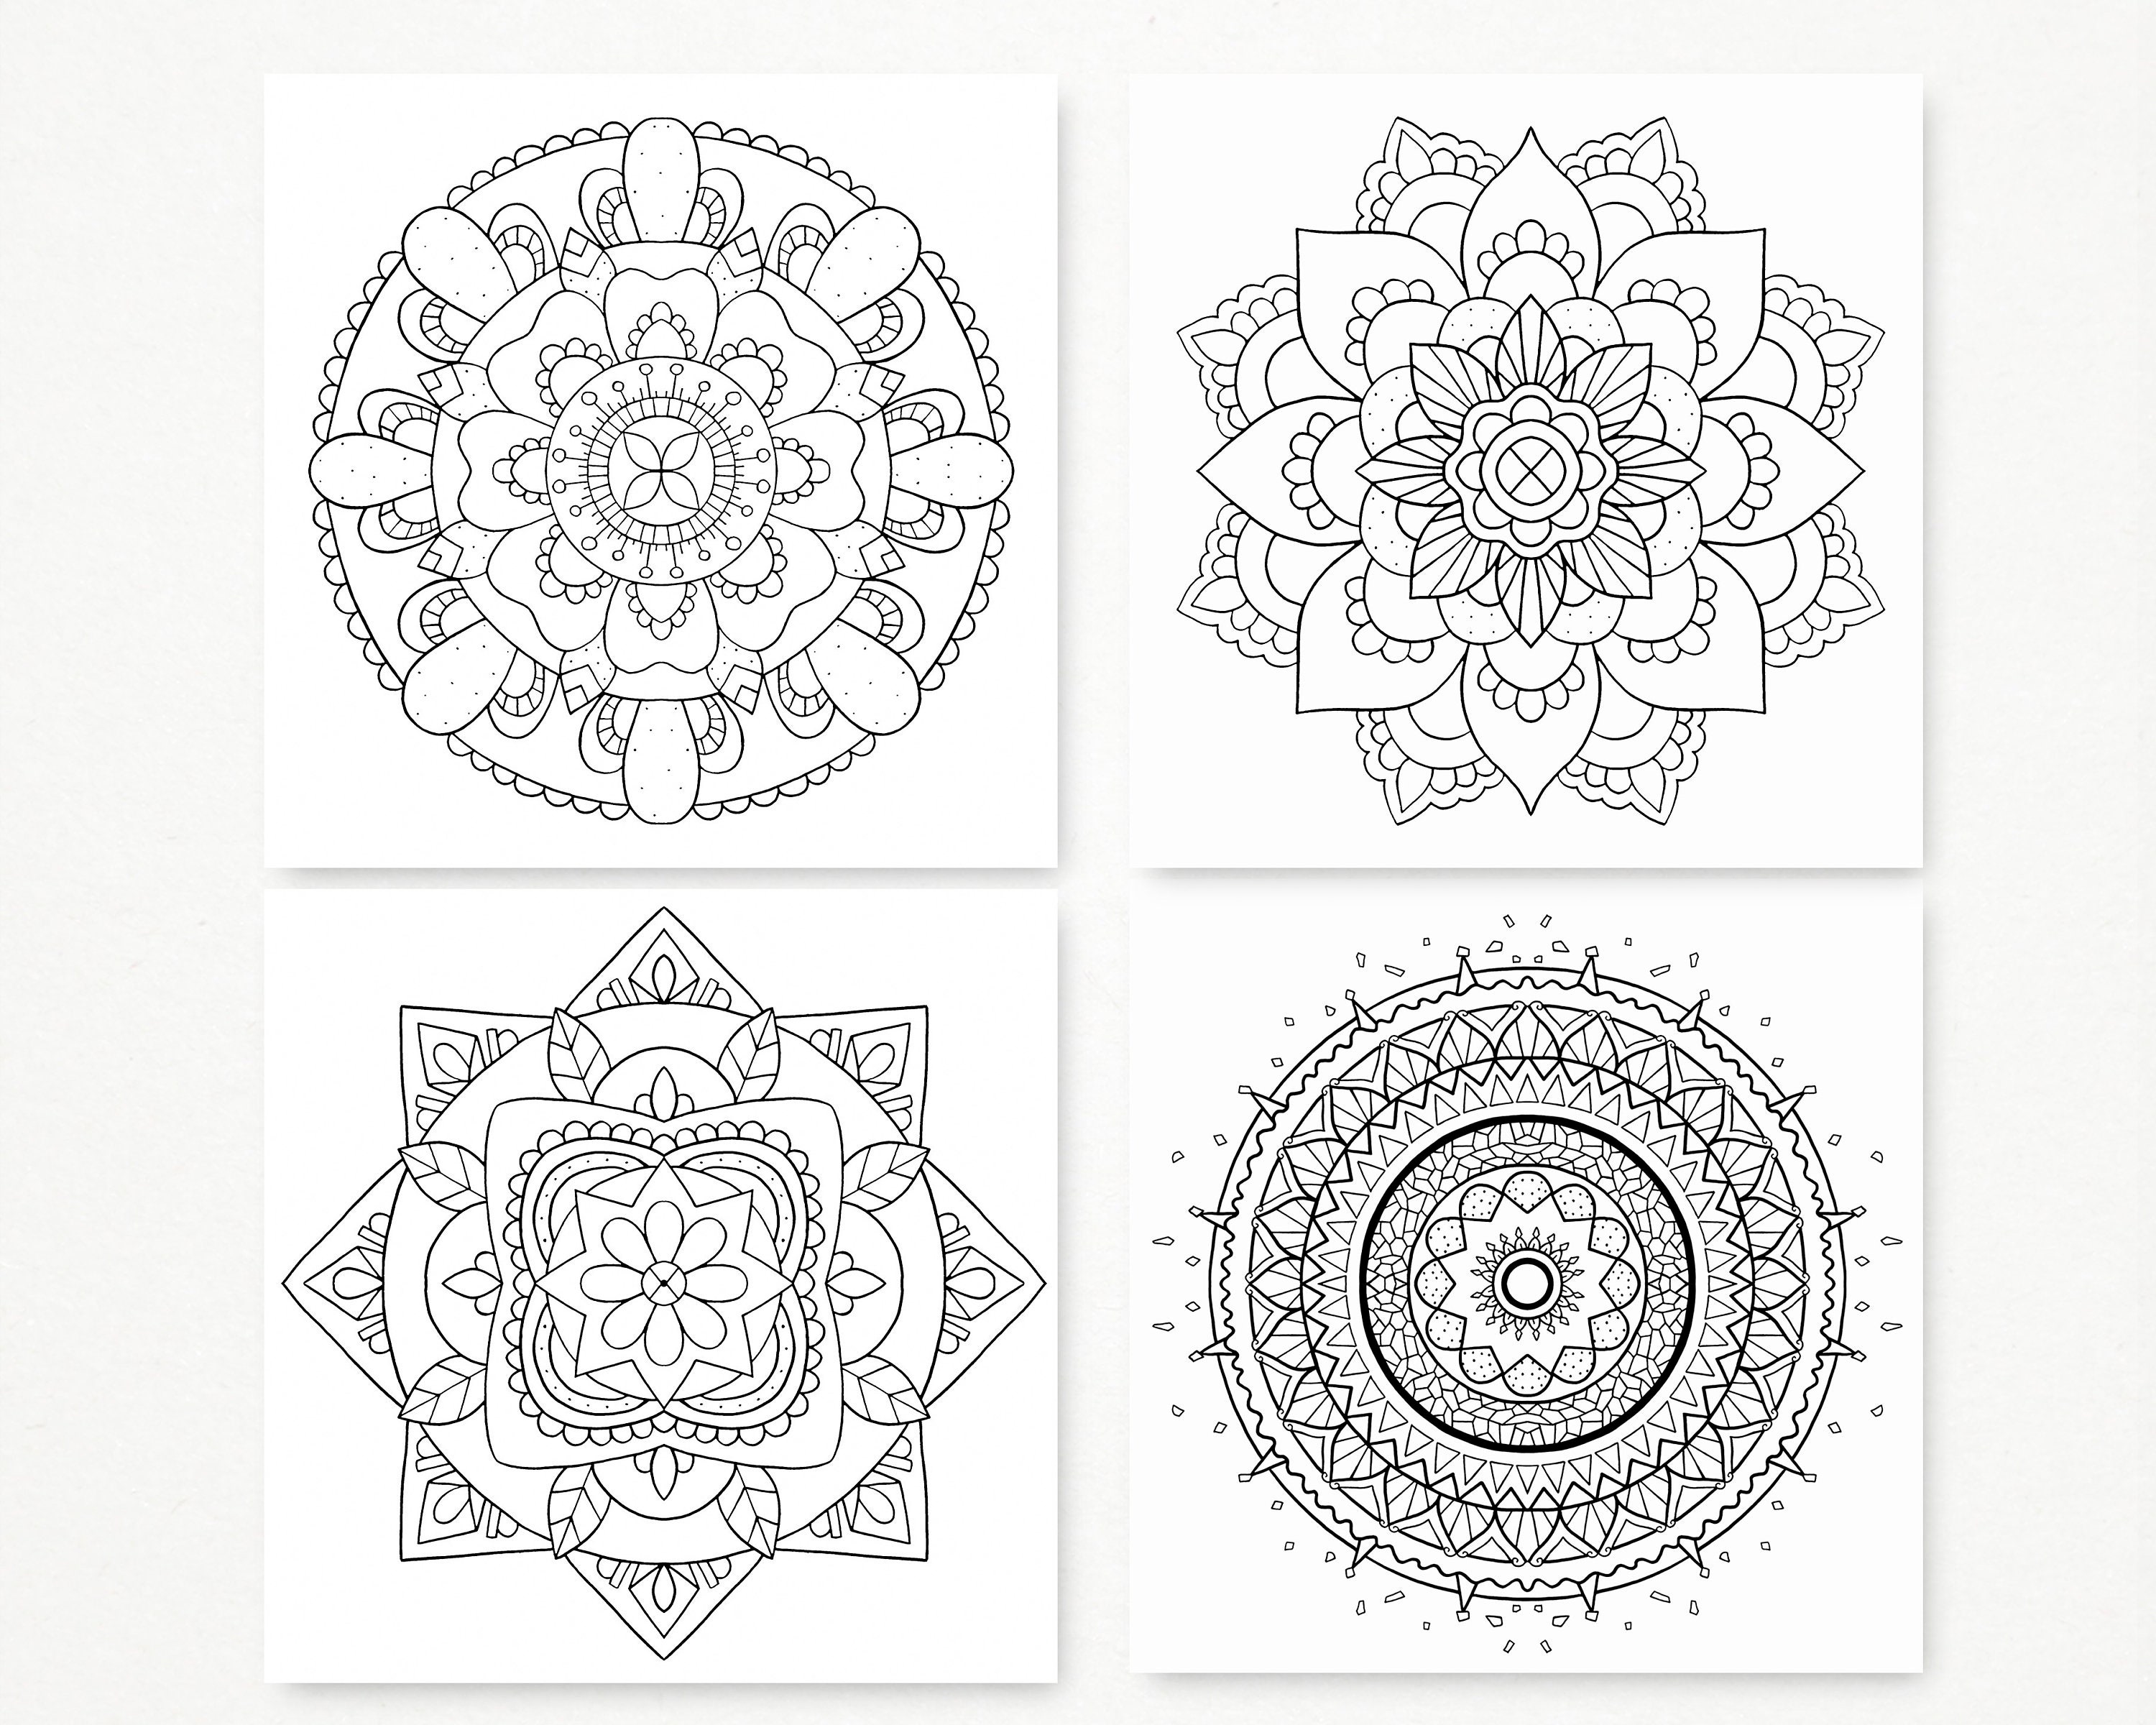 Mandala Coloring Book For Adults Relaxation For Pregnant Women: 50 Relaxing  Mandalas by Isoken Gaius